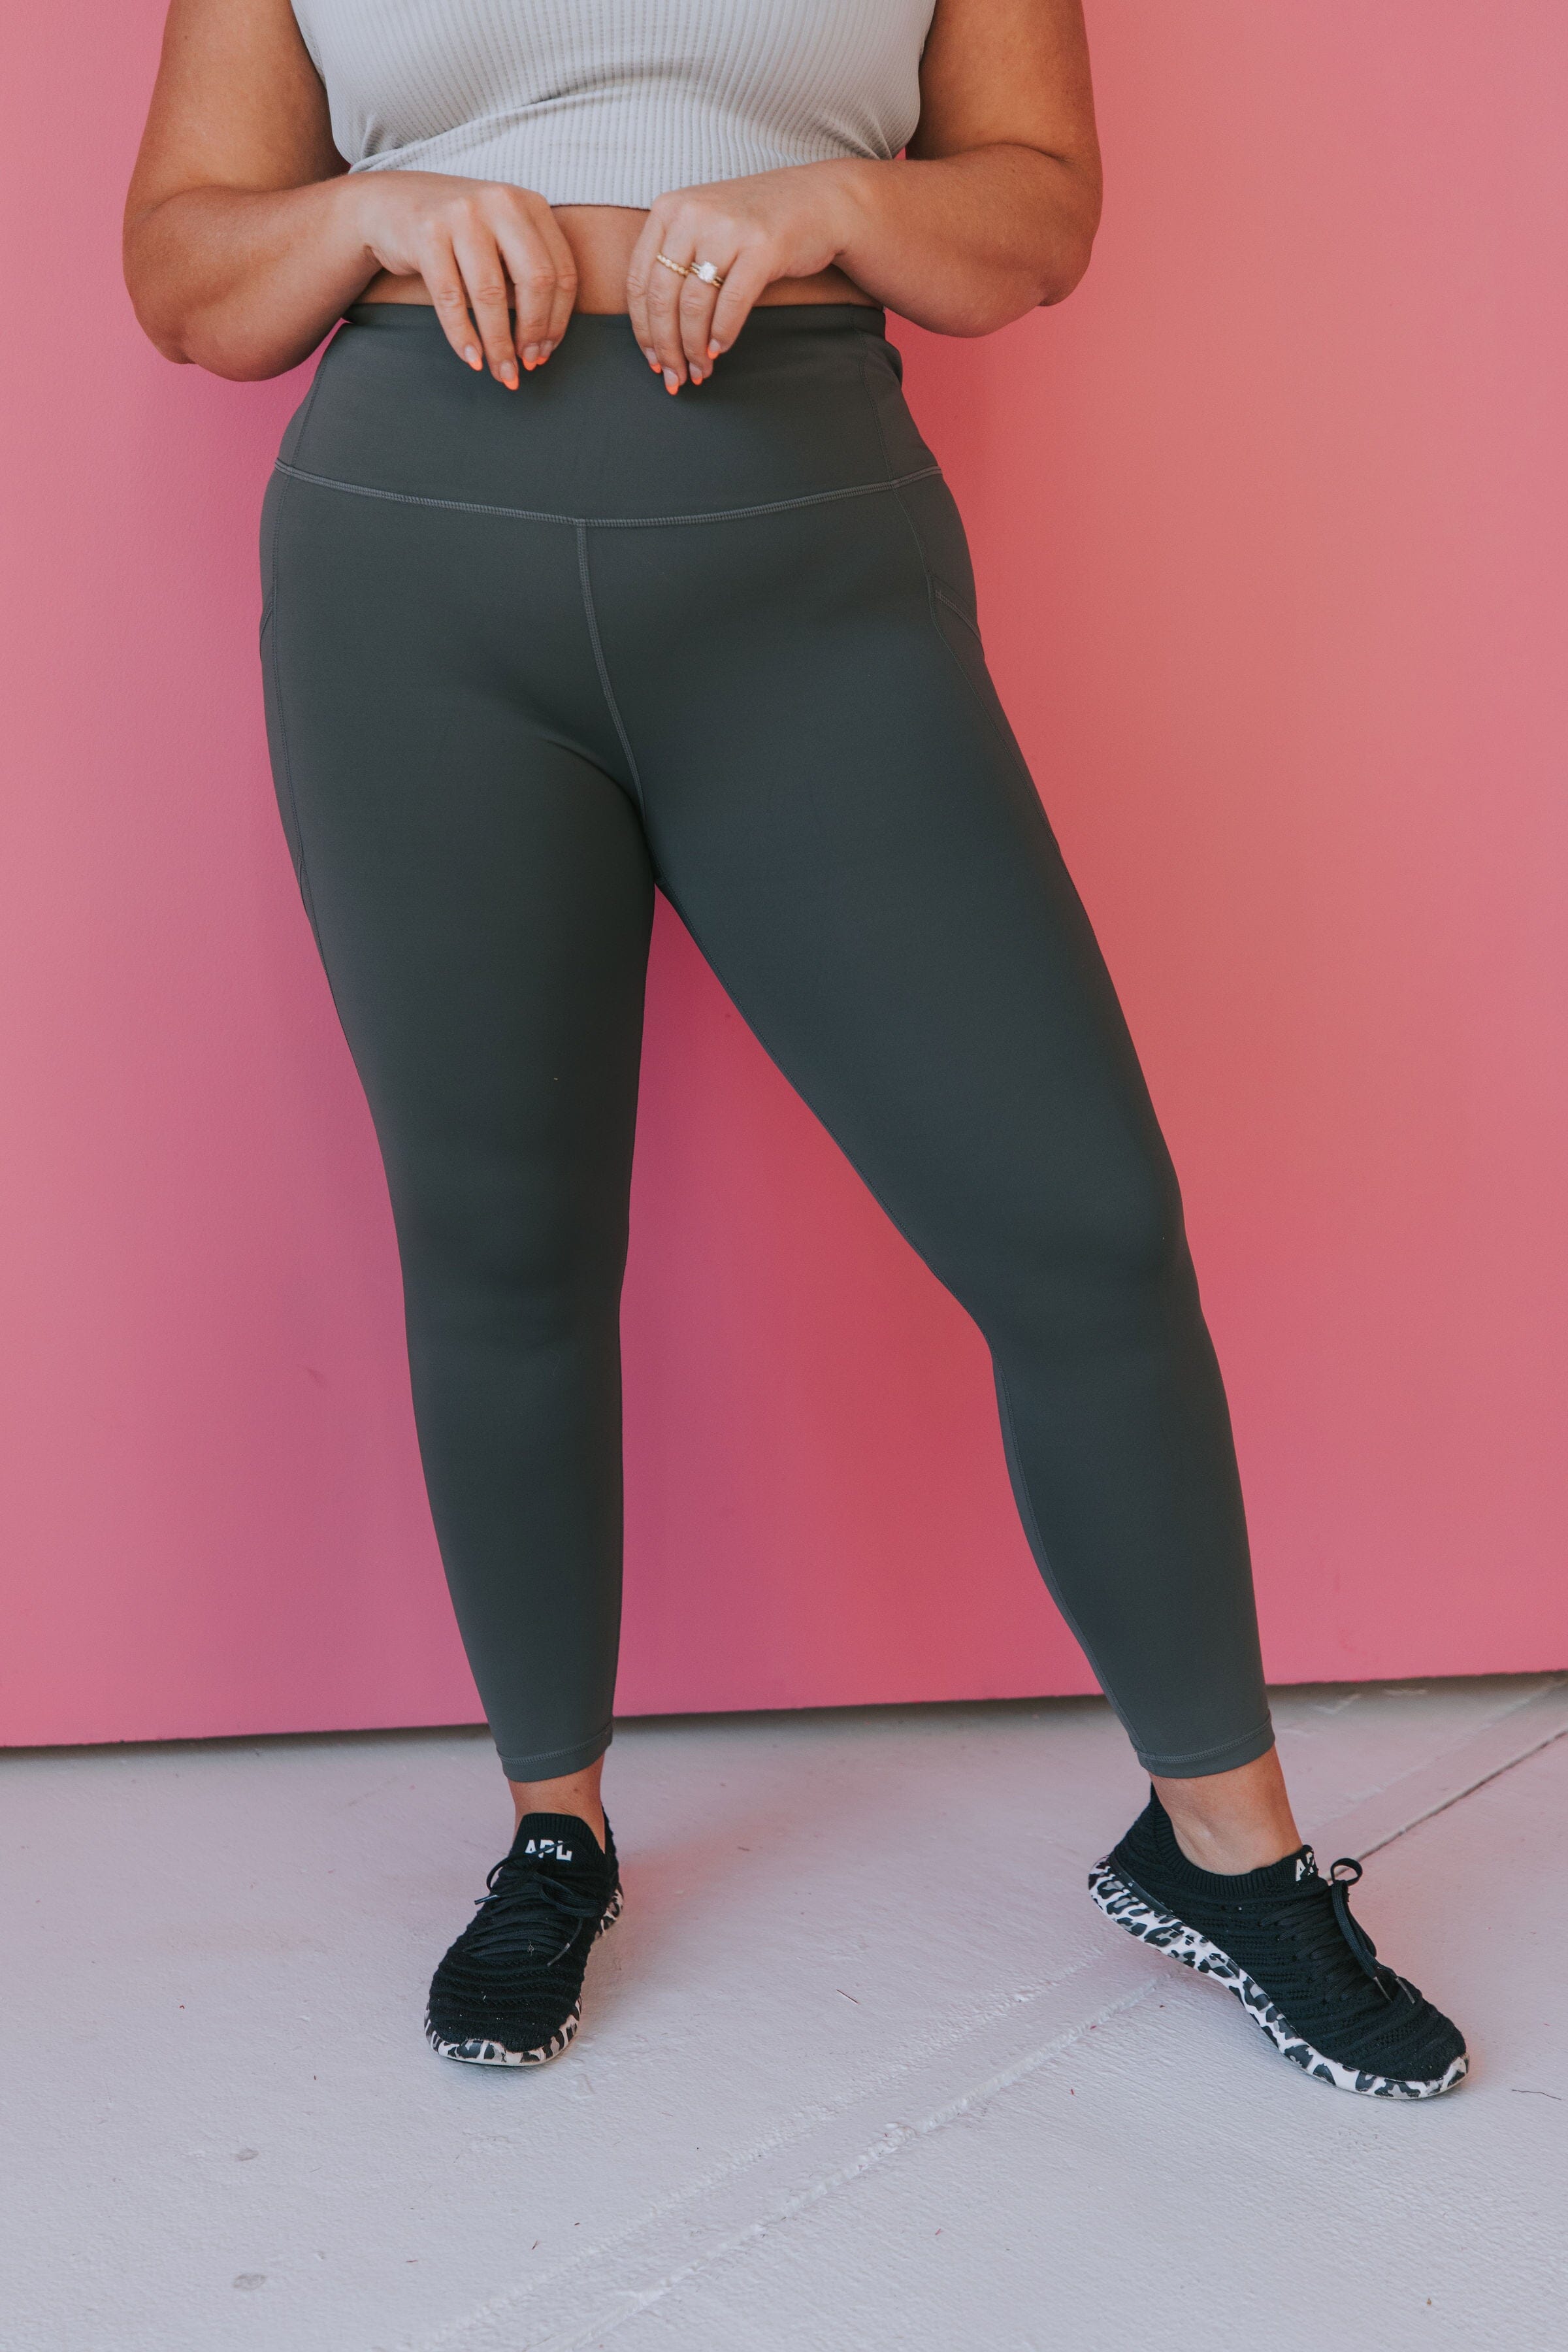 PLUS SIZE - Head In The Game Leggings 